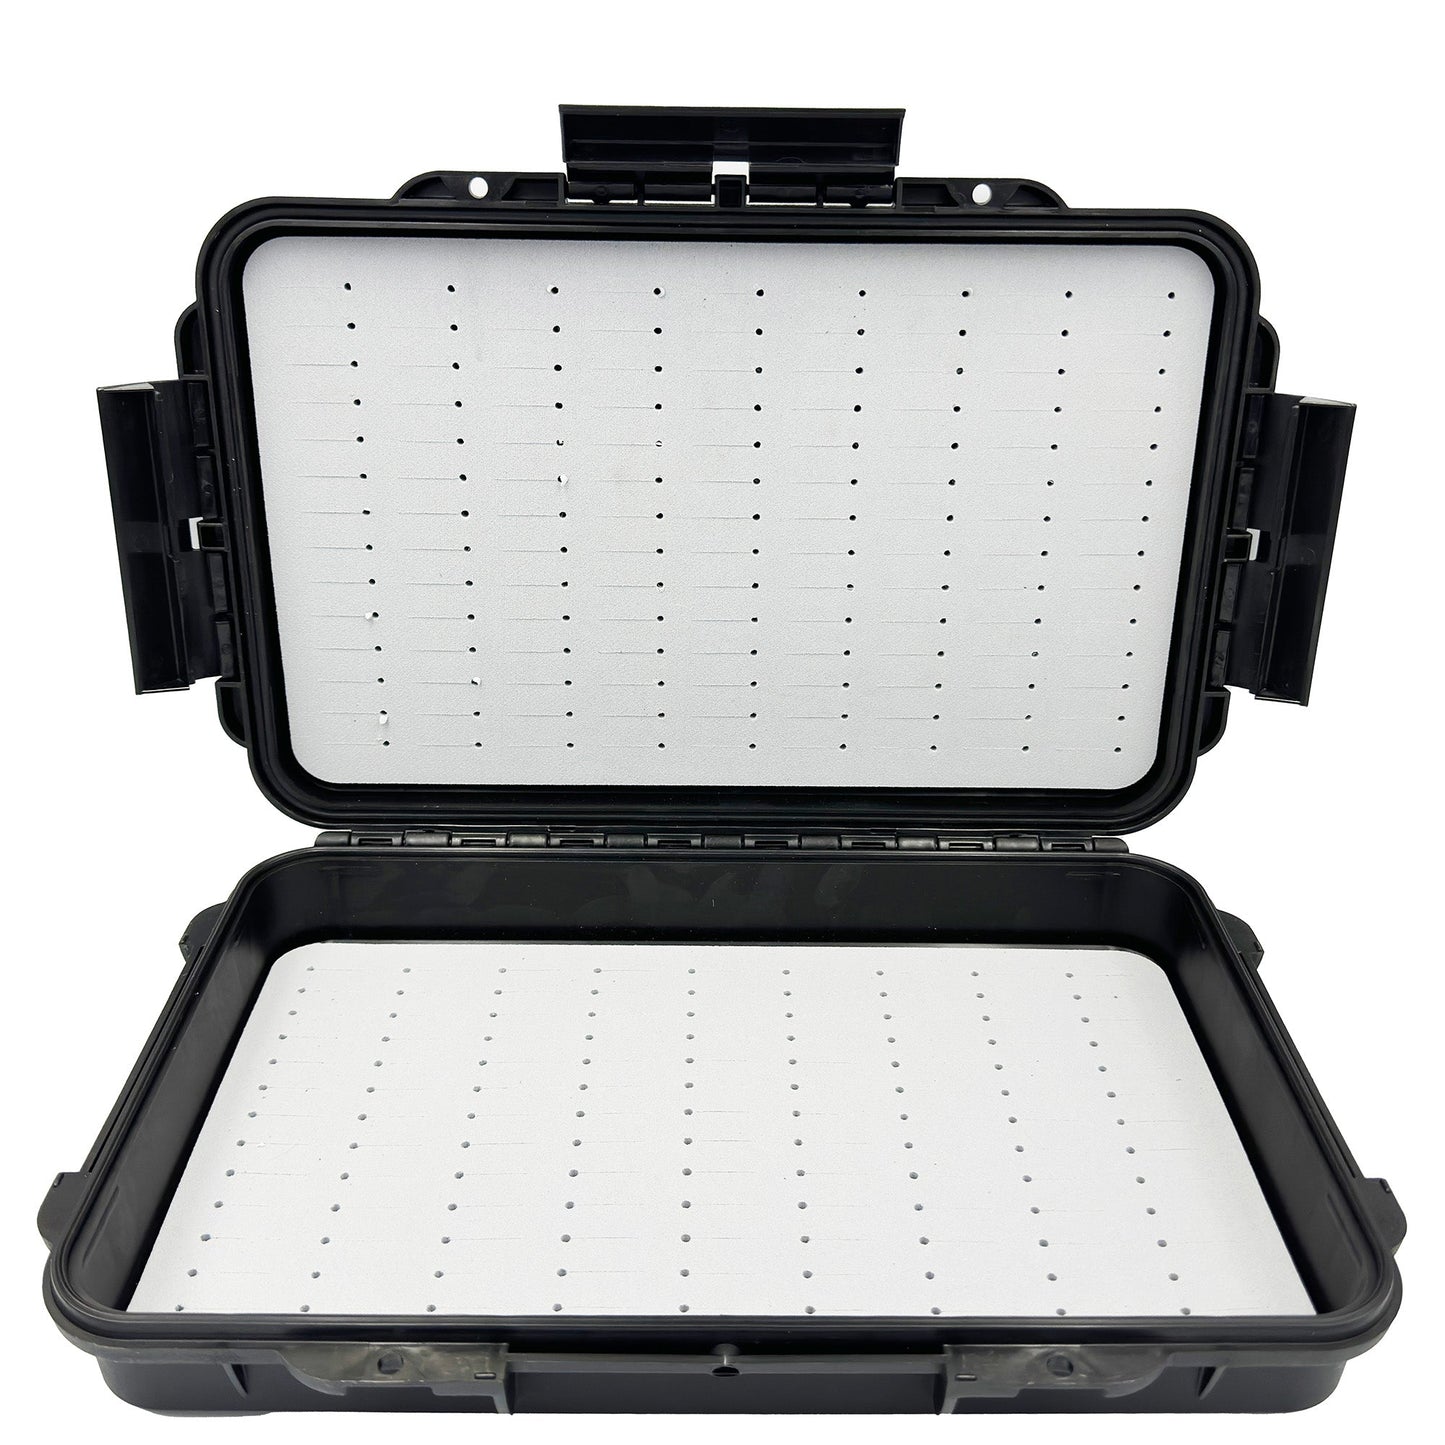 Innovator Waterproof Fly Box-Fly Fishing - Boxes & Patches-Innovator-Small-Fishing Station